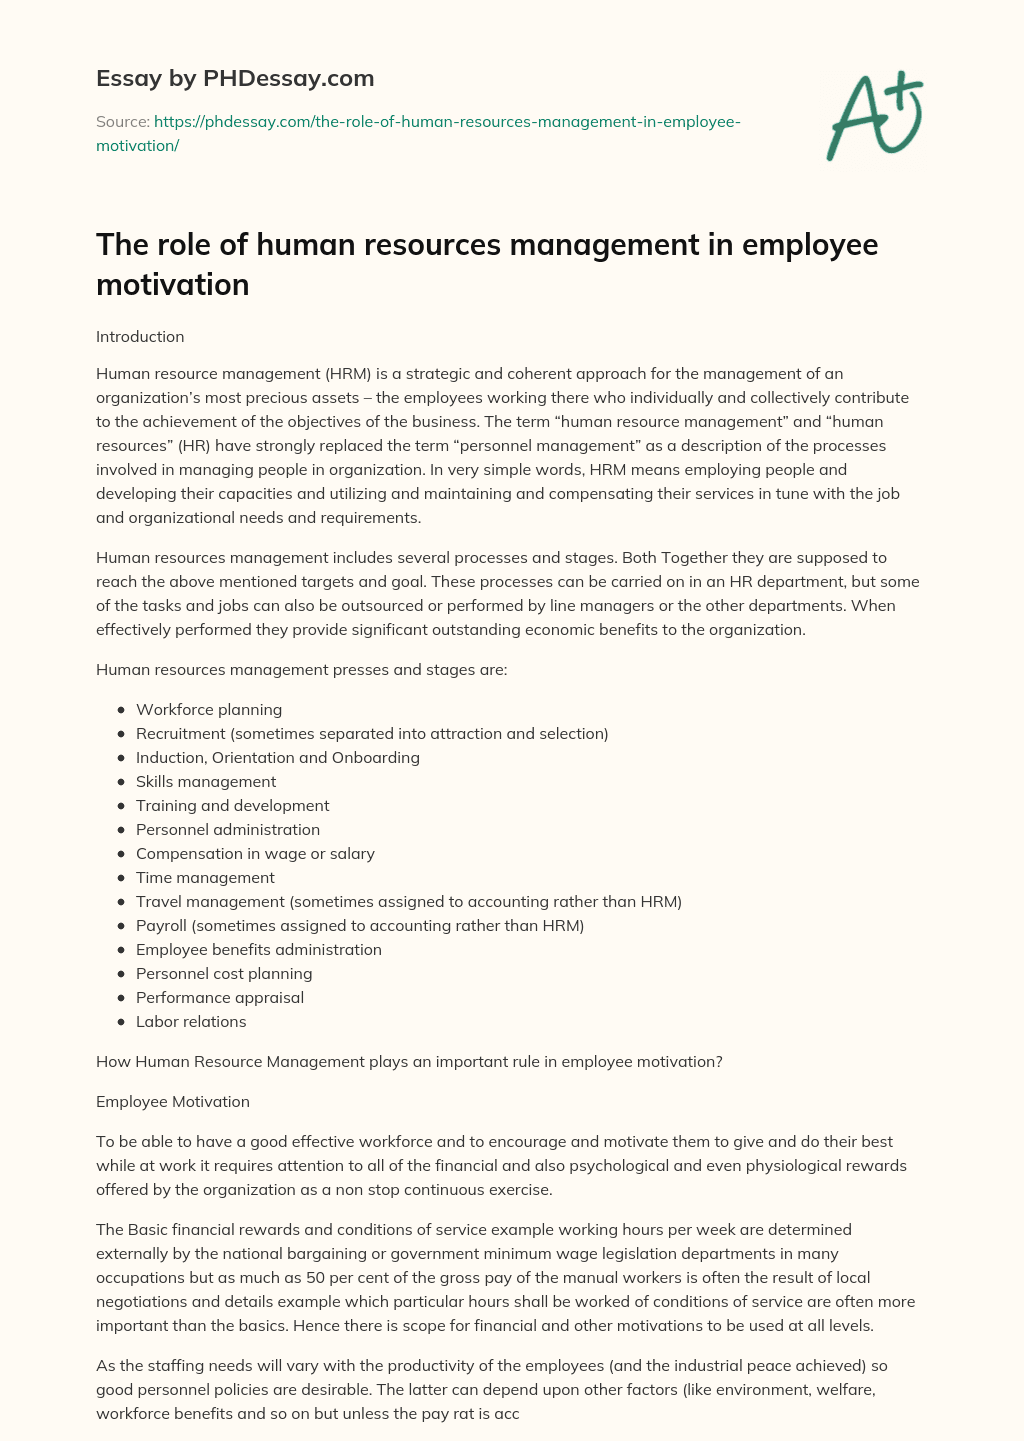 The role of human resources management in employee motivation essay